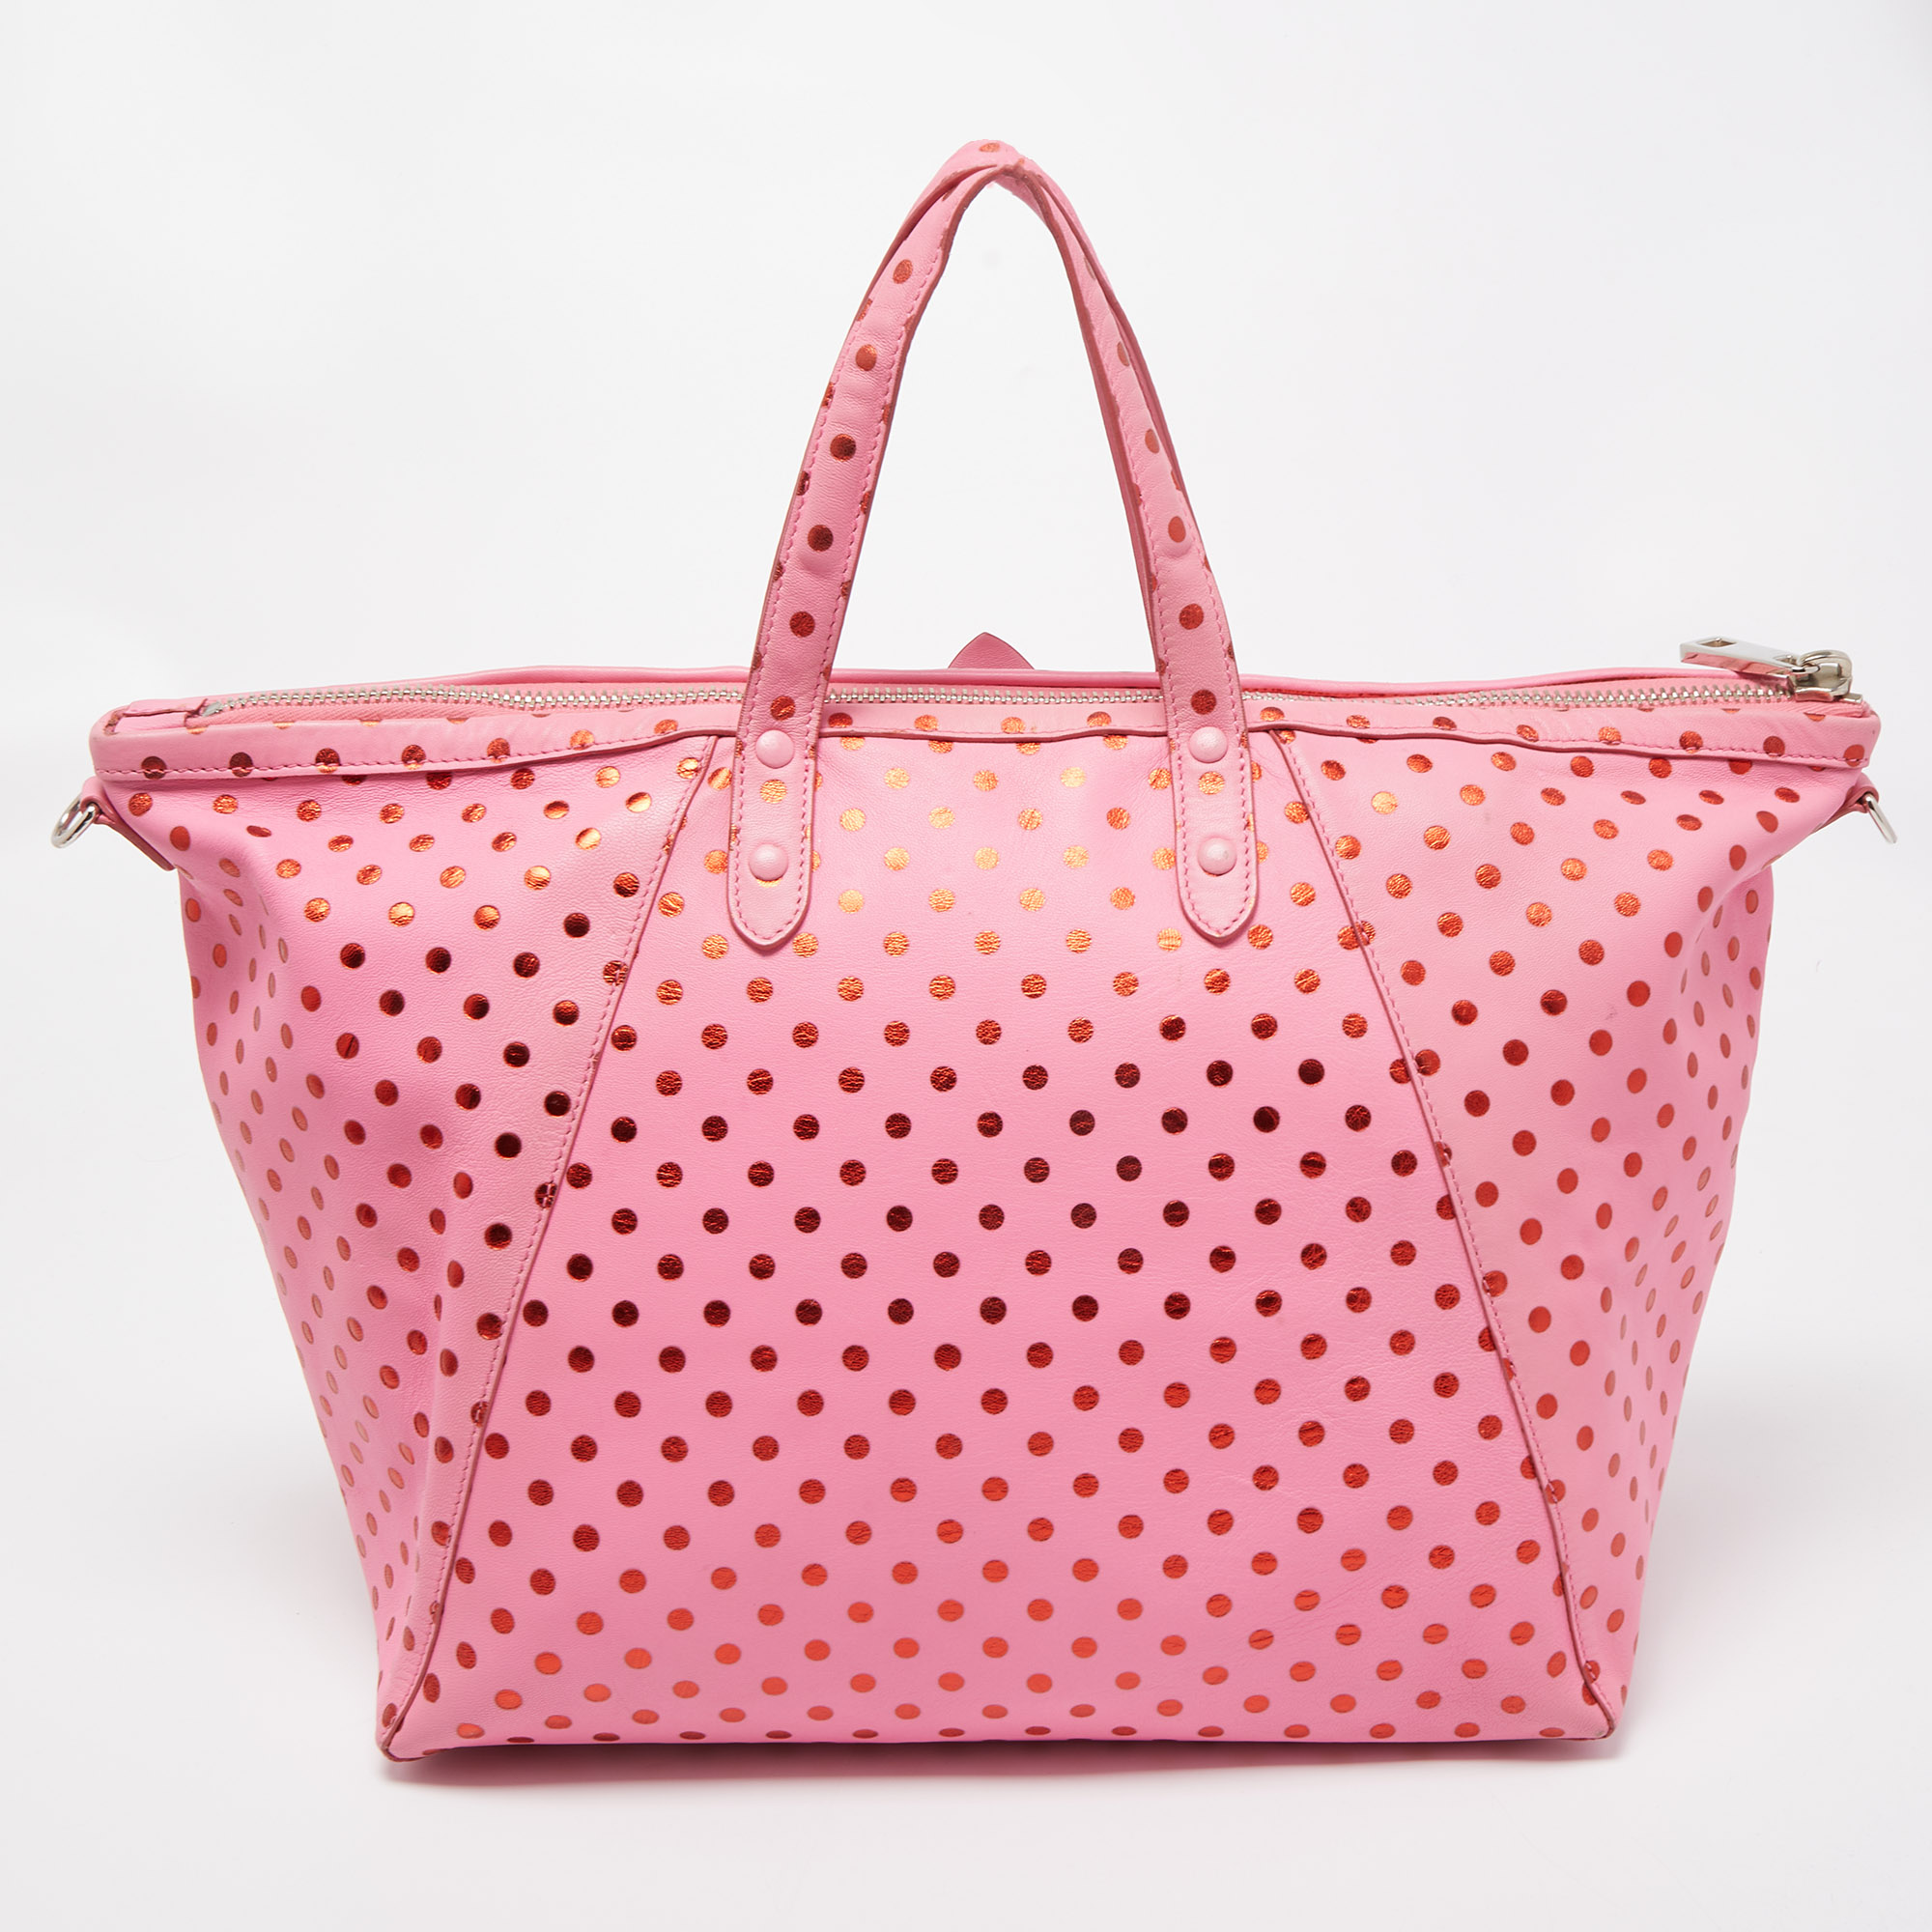 Marc Jacobs Pink Leather Polka Dot Zip Tote